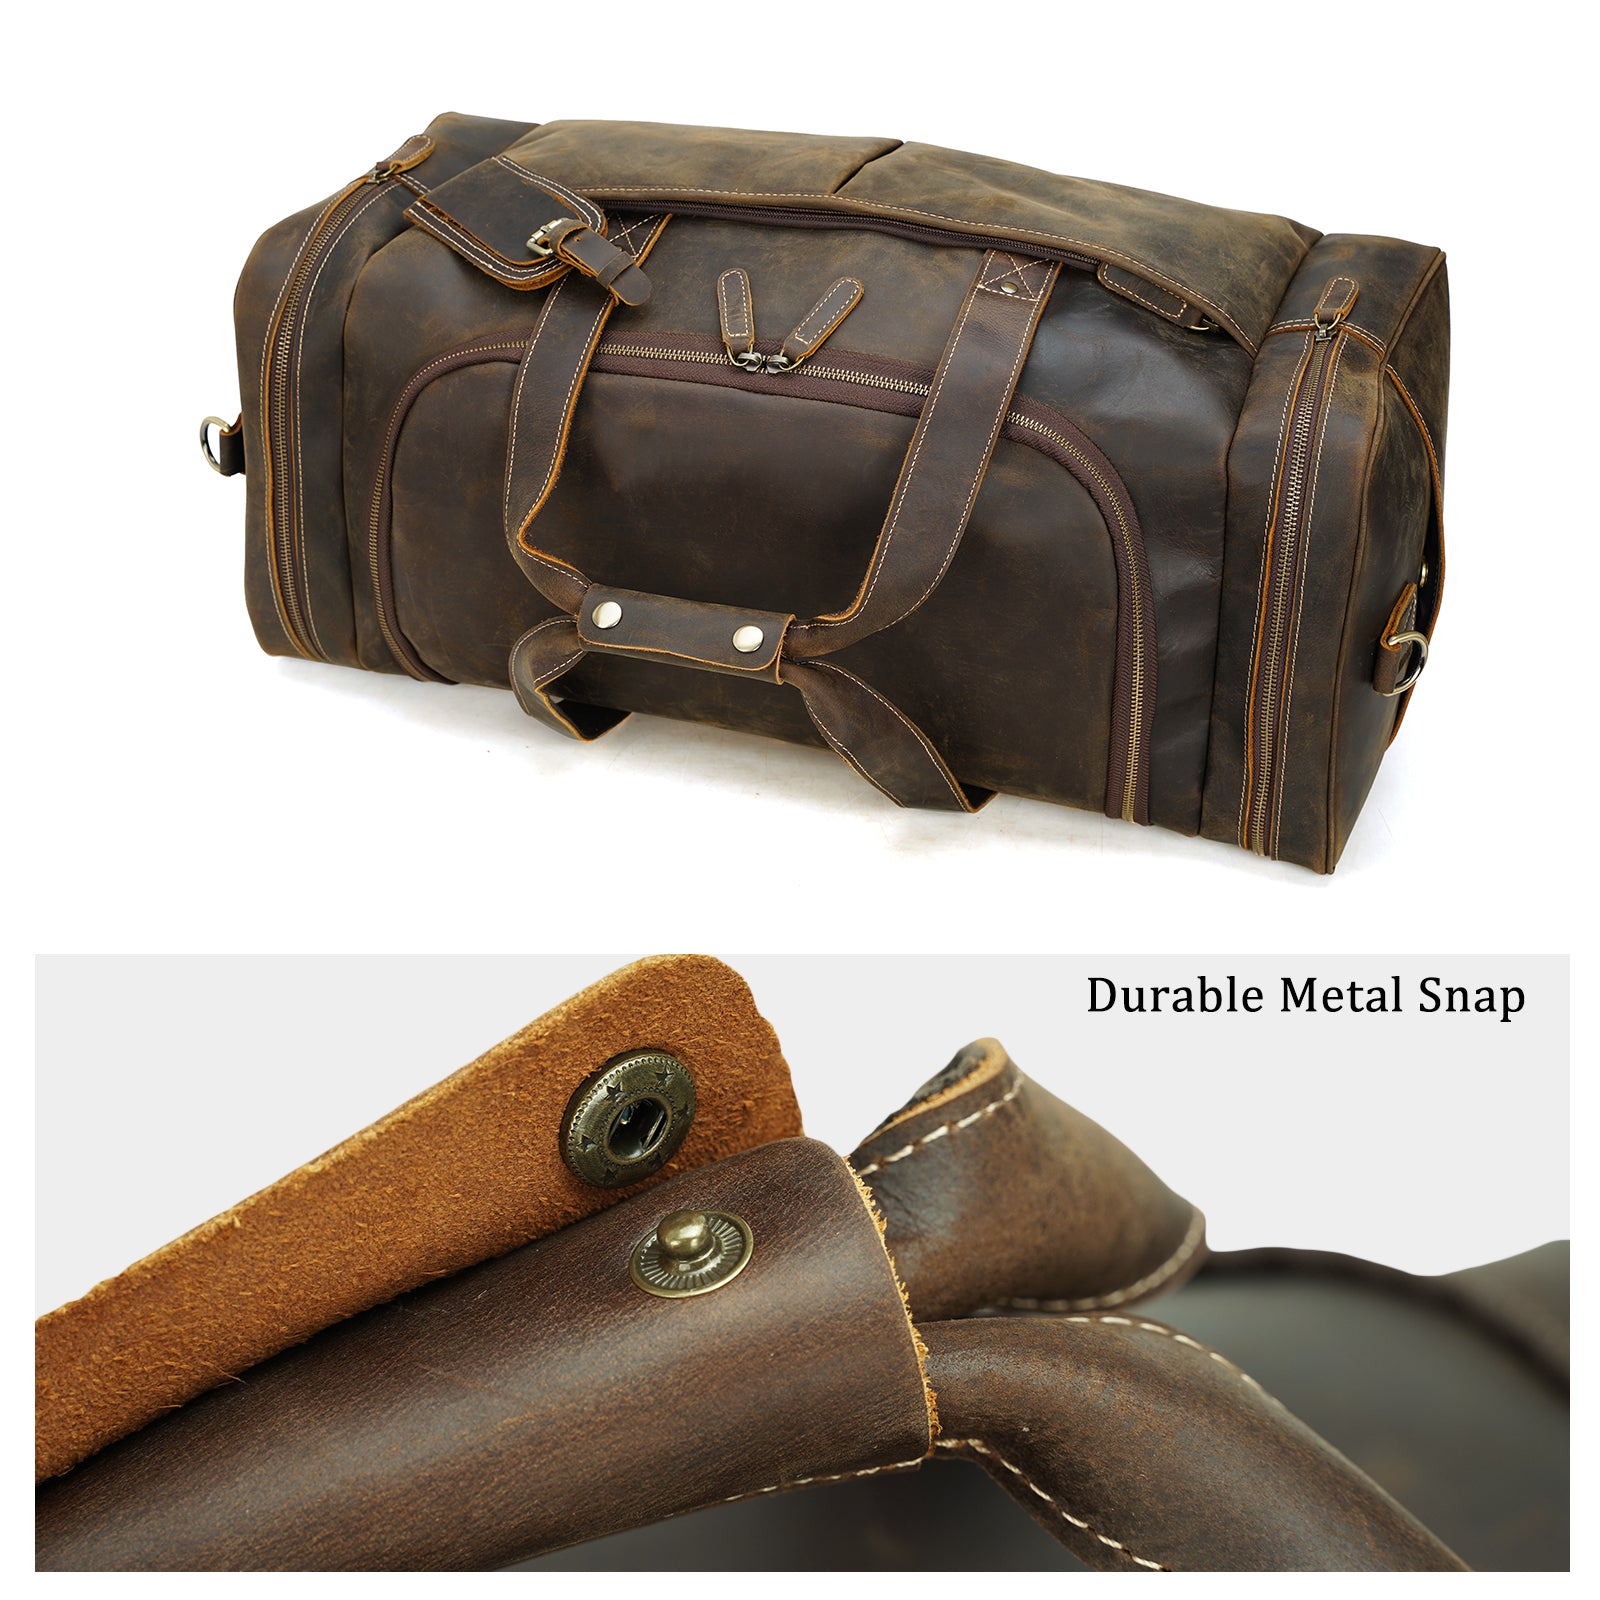 leather duffle bag – Satchel & Page